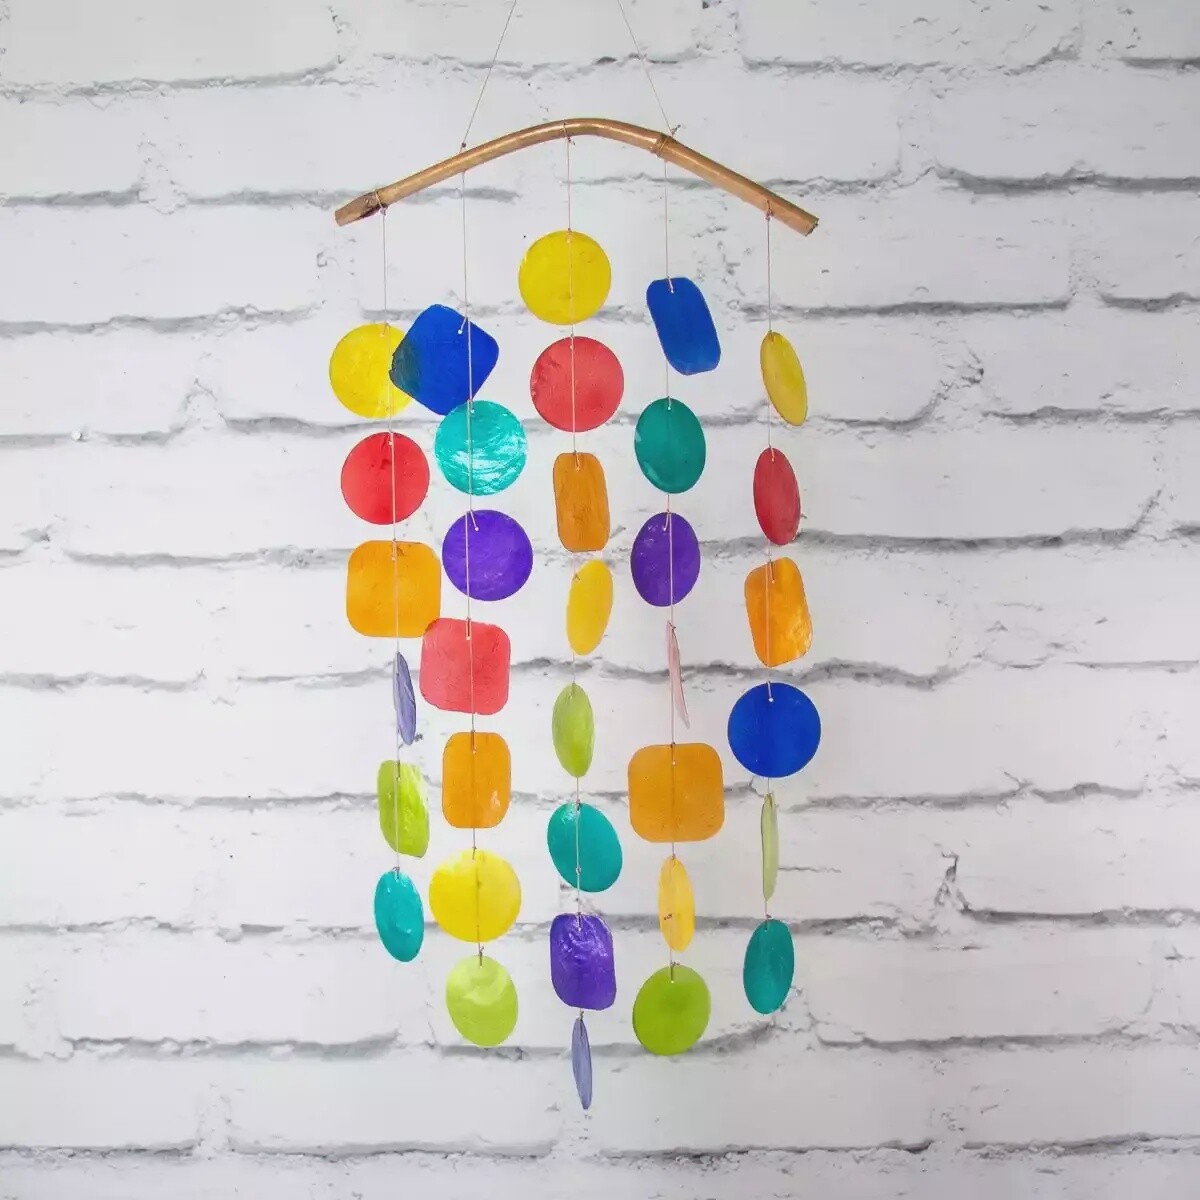 Capiz and Bamboo Wind Chime - Rainbow by Sunlover